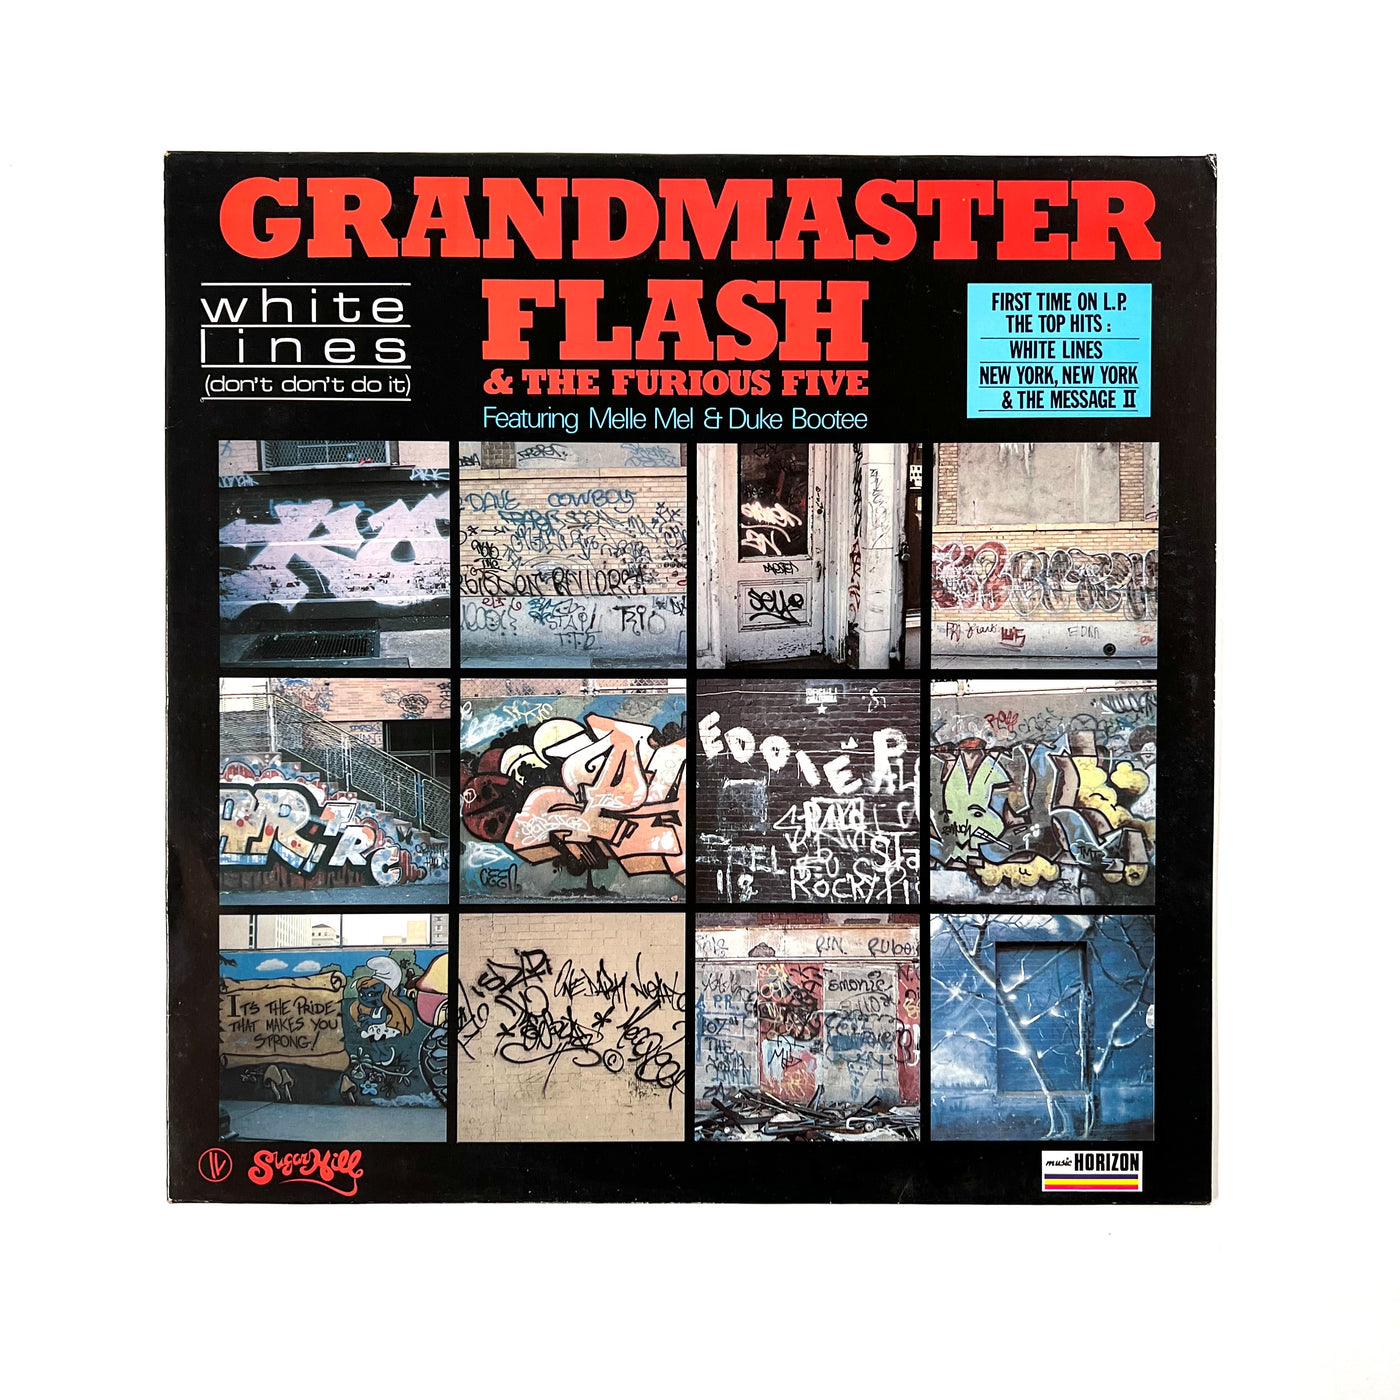 Grandmaster Flash & The Furious Five Featuring Melle Mel & Duke Bootee - White Lines (Don't Don't Do It)